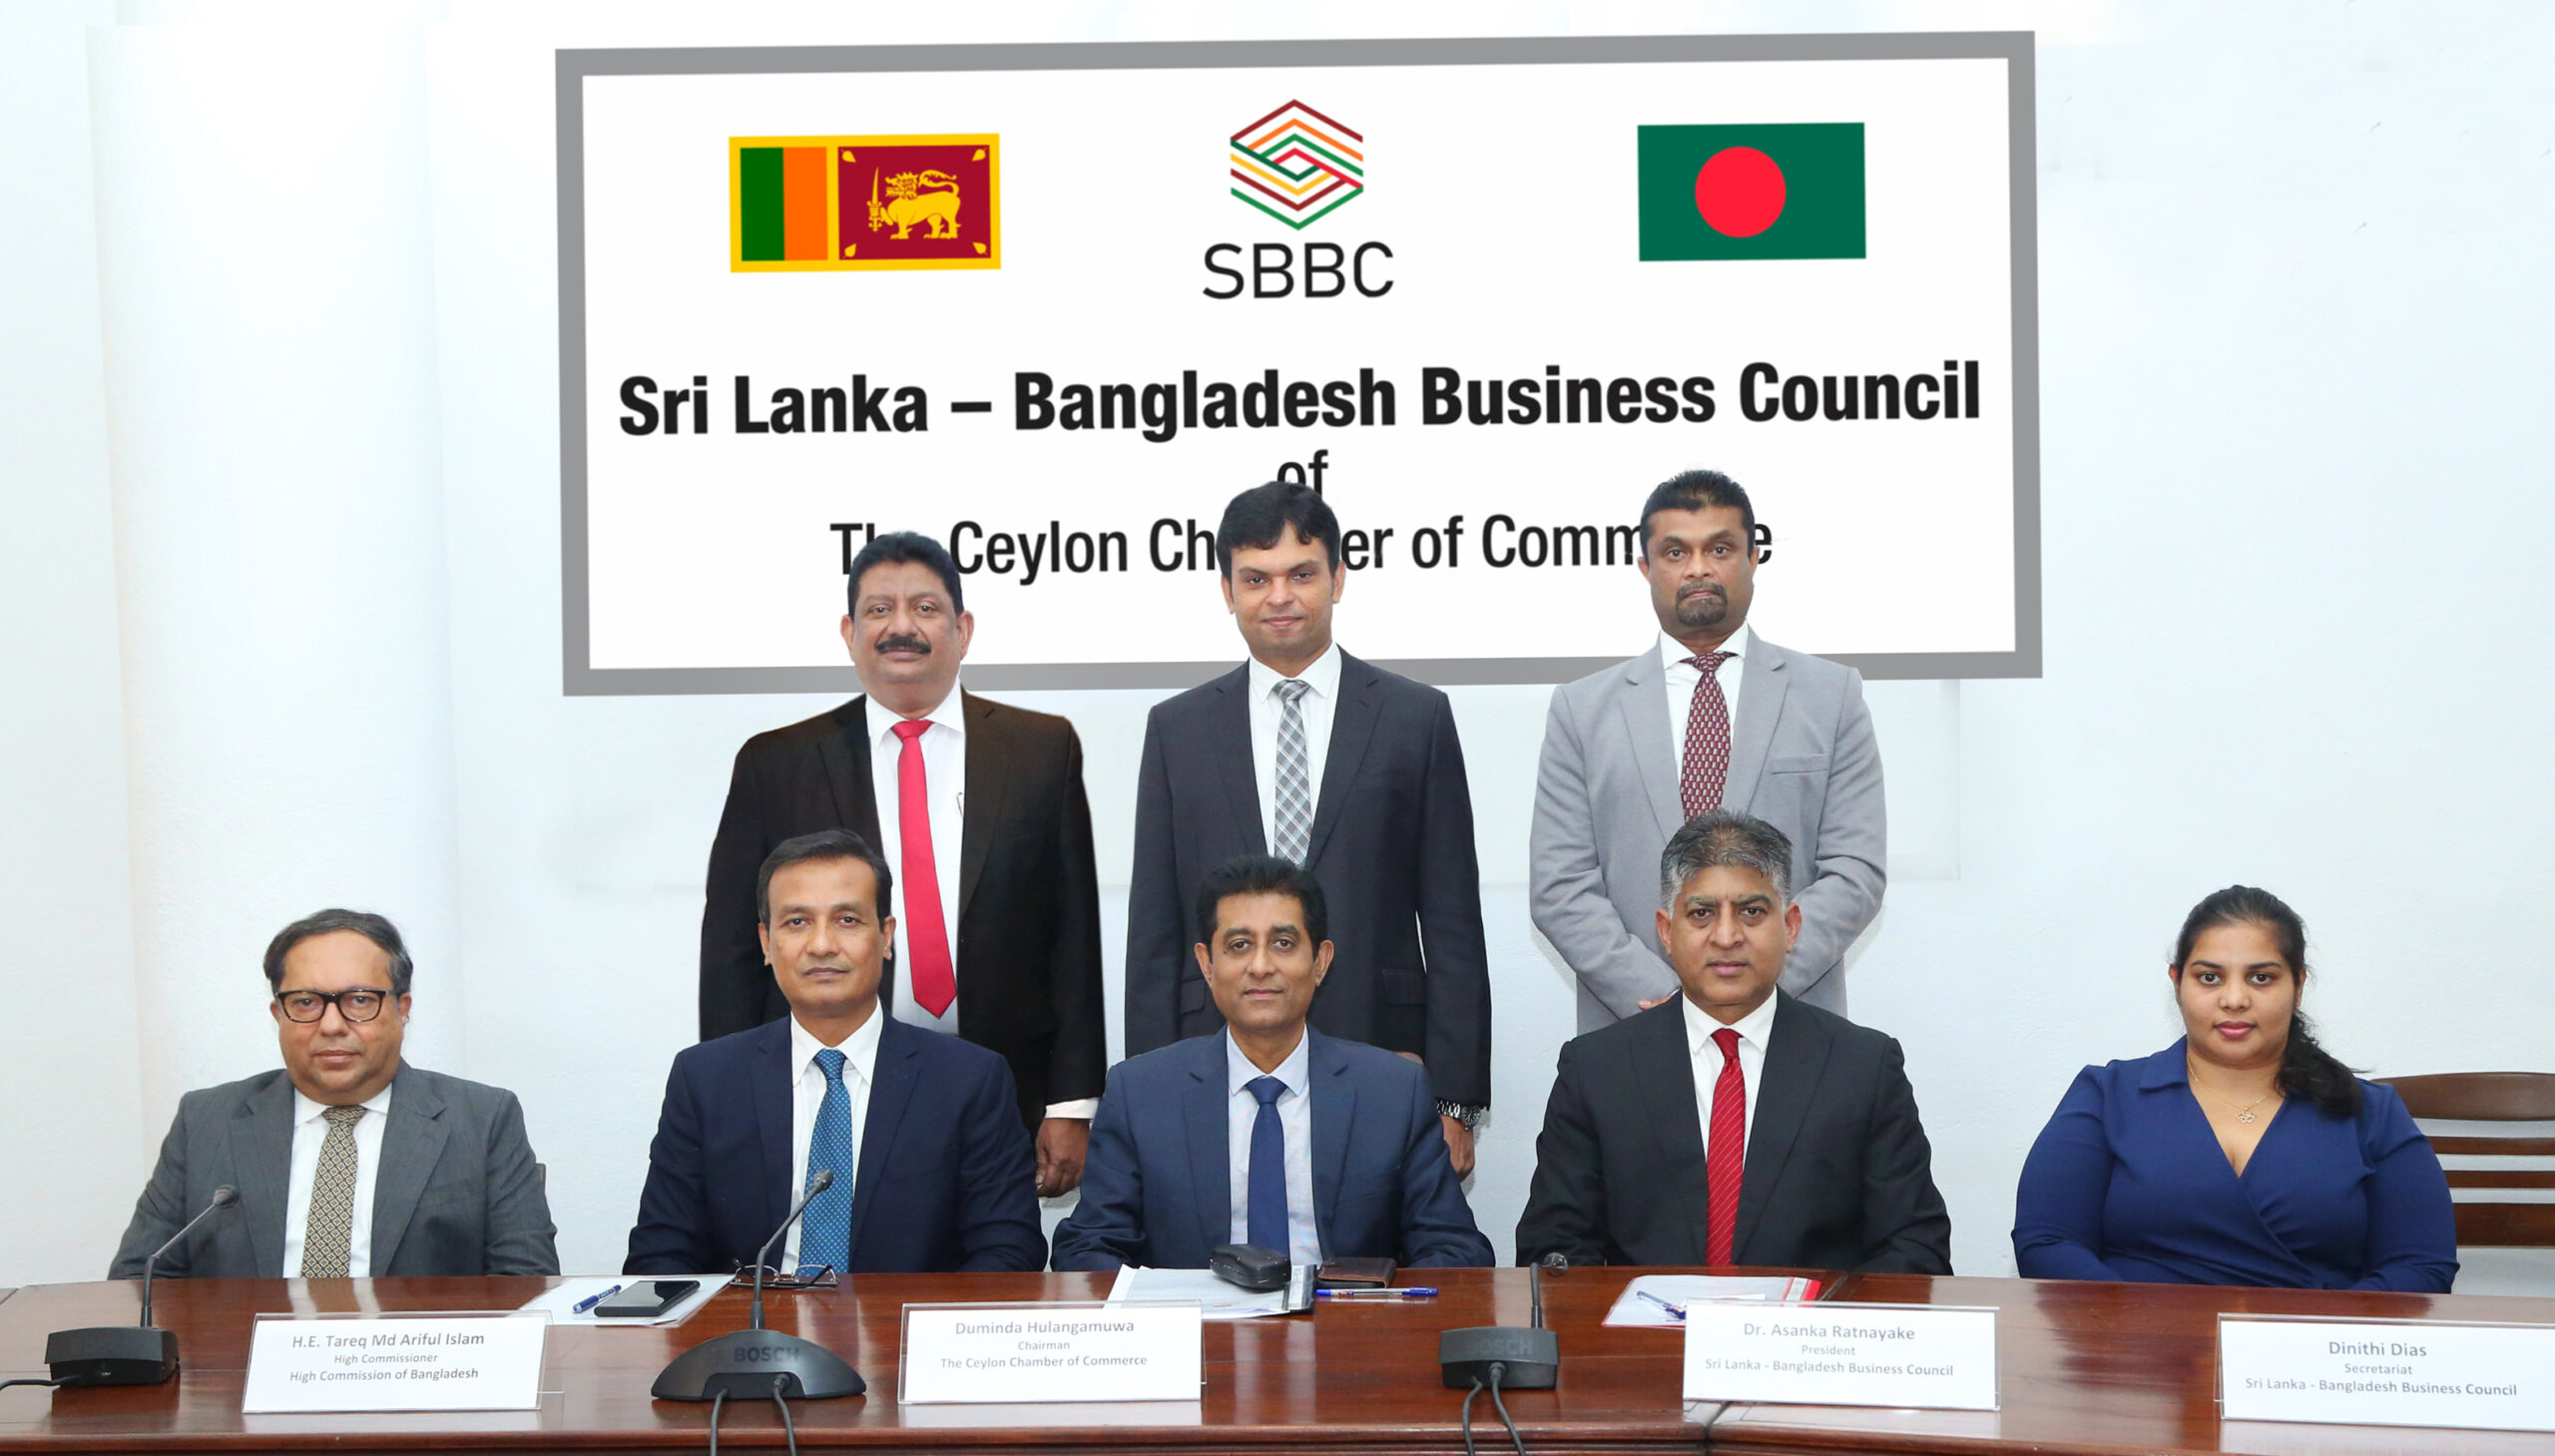 The Ceylon Chamber of Commerce Launches the Sri Lanka – Bangladesh Business Council